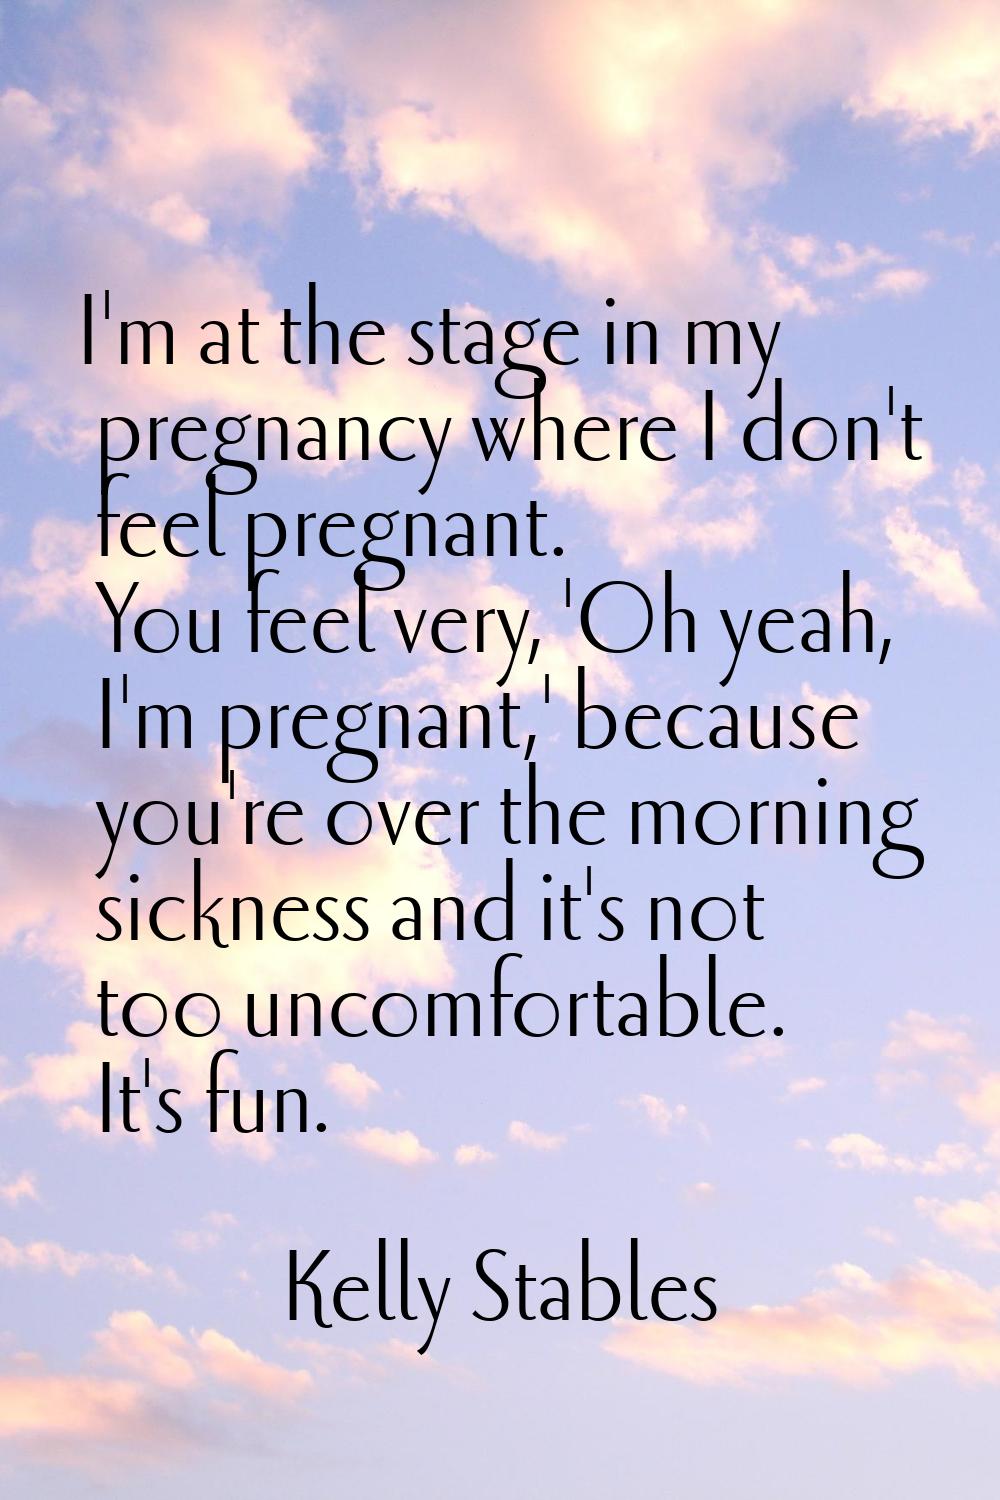 I'm at the stage in my pregnancy where I don't feel pregnant. You feel very, 'Oh yeah, I'm pregnant